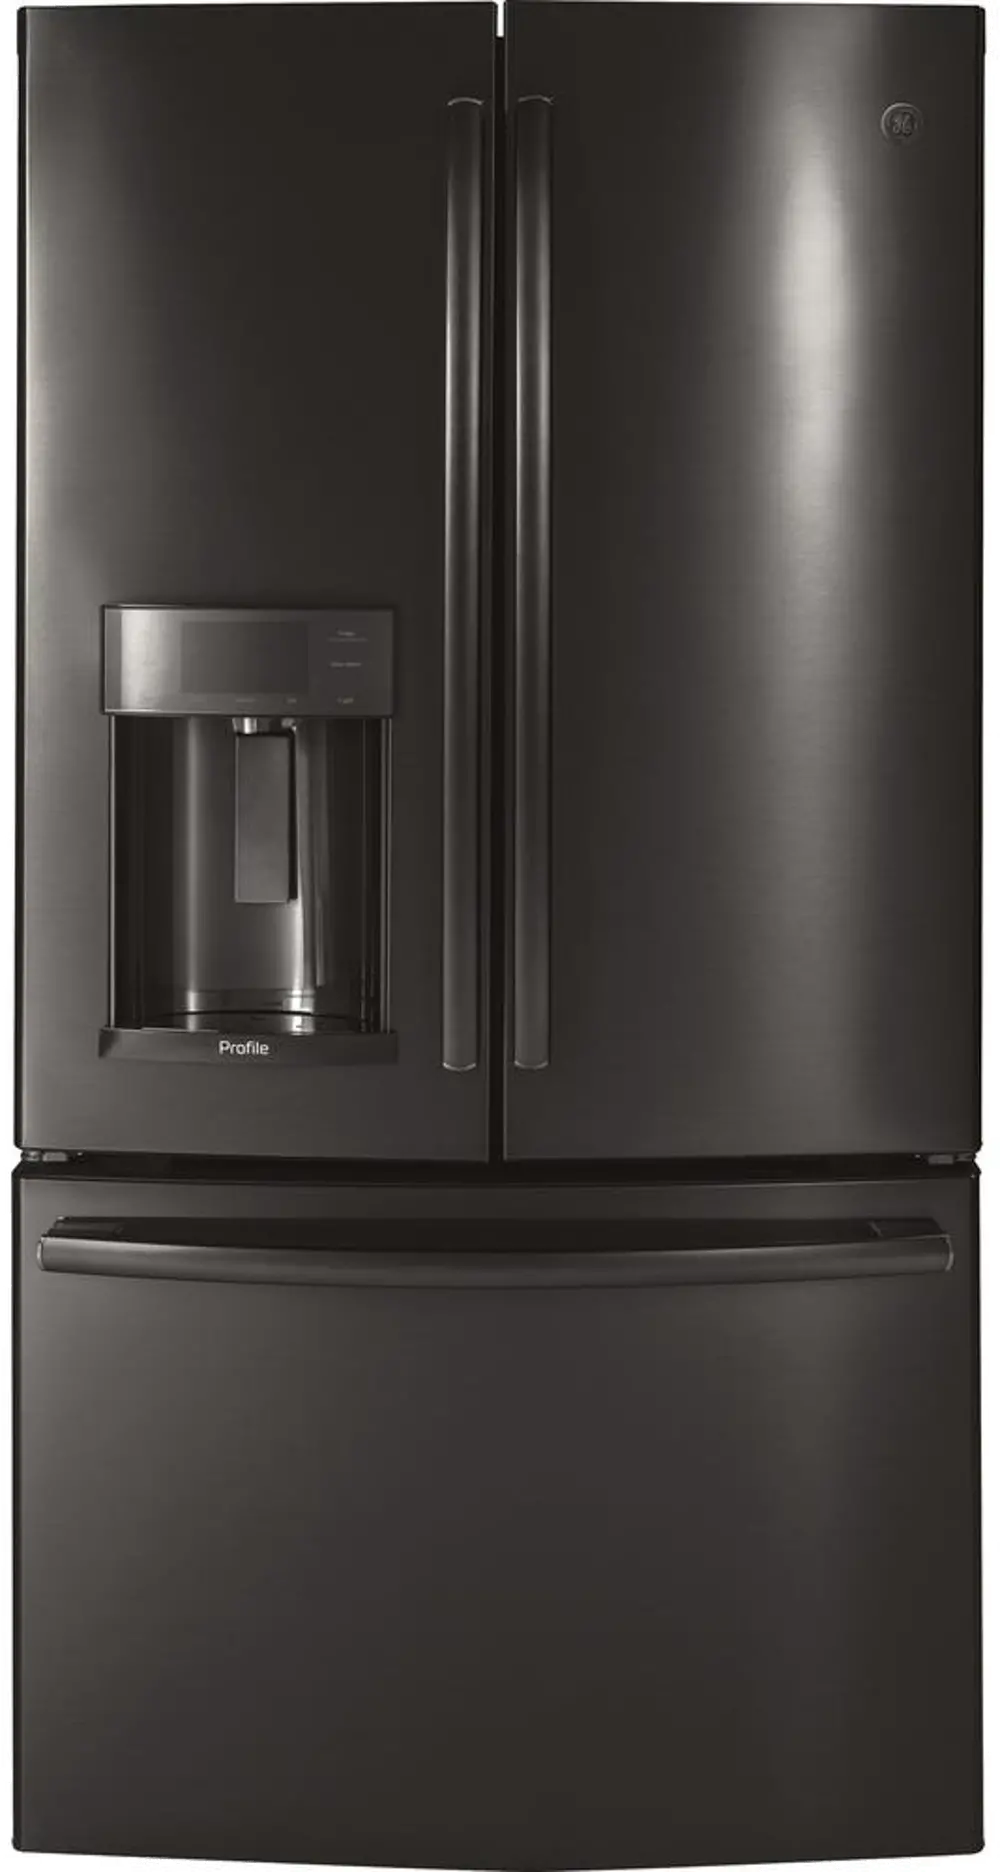 PYE22KBLTS GE Profile 22 cu ft French Door Refrigerator - Counter Depth Black Stainless Steel-1